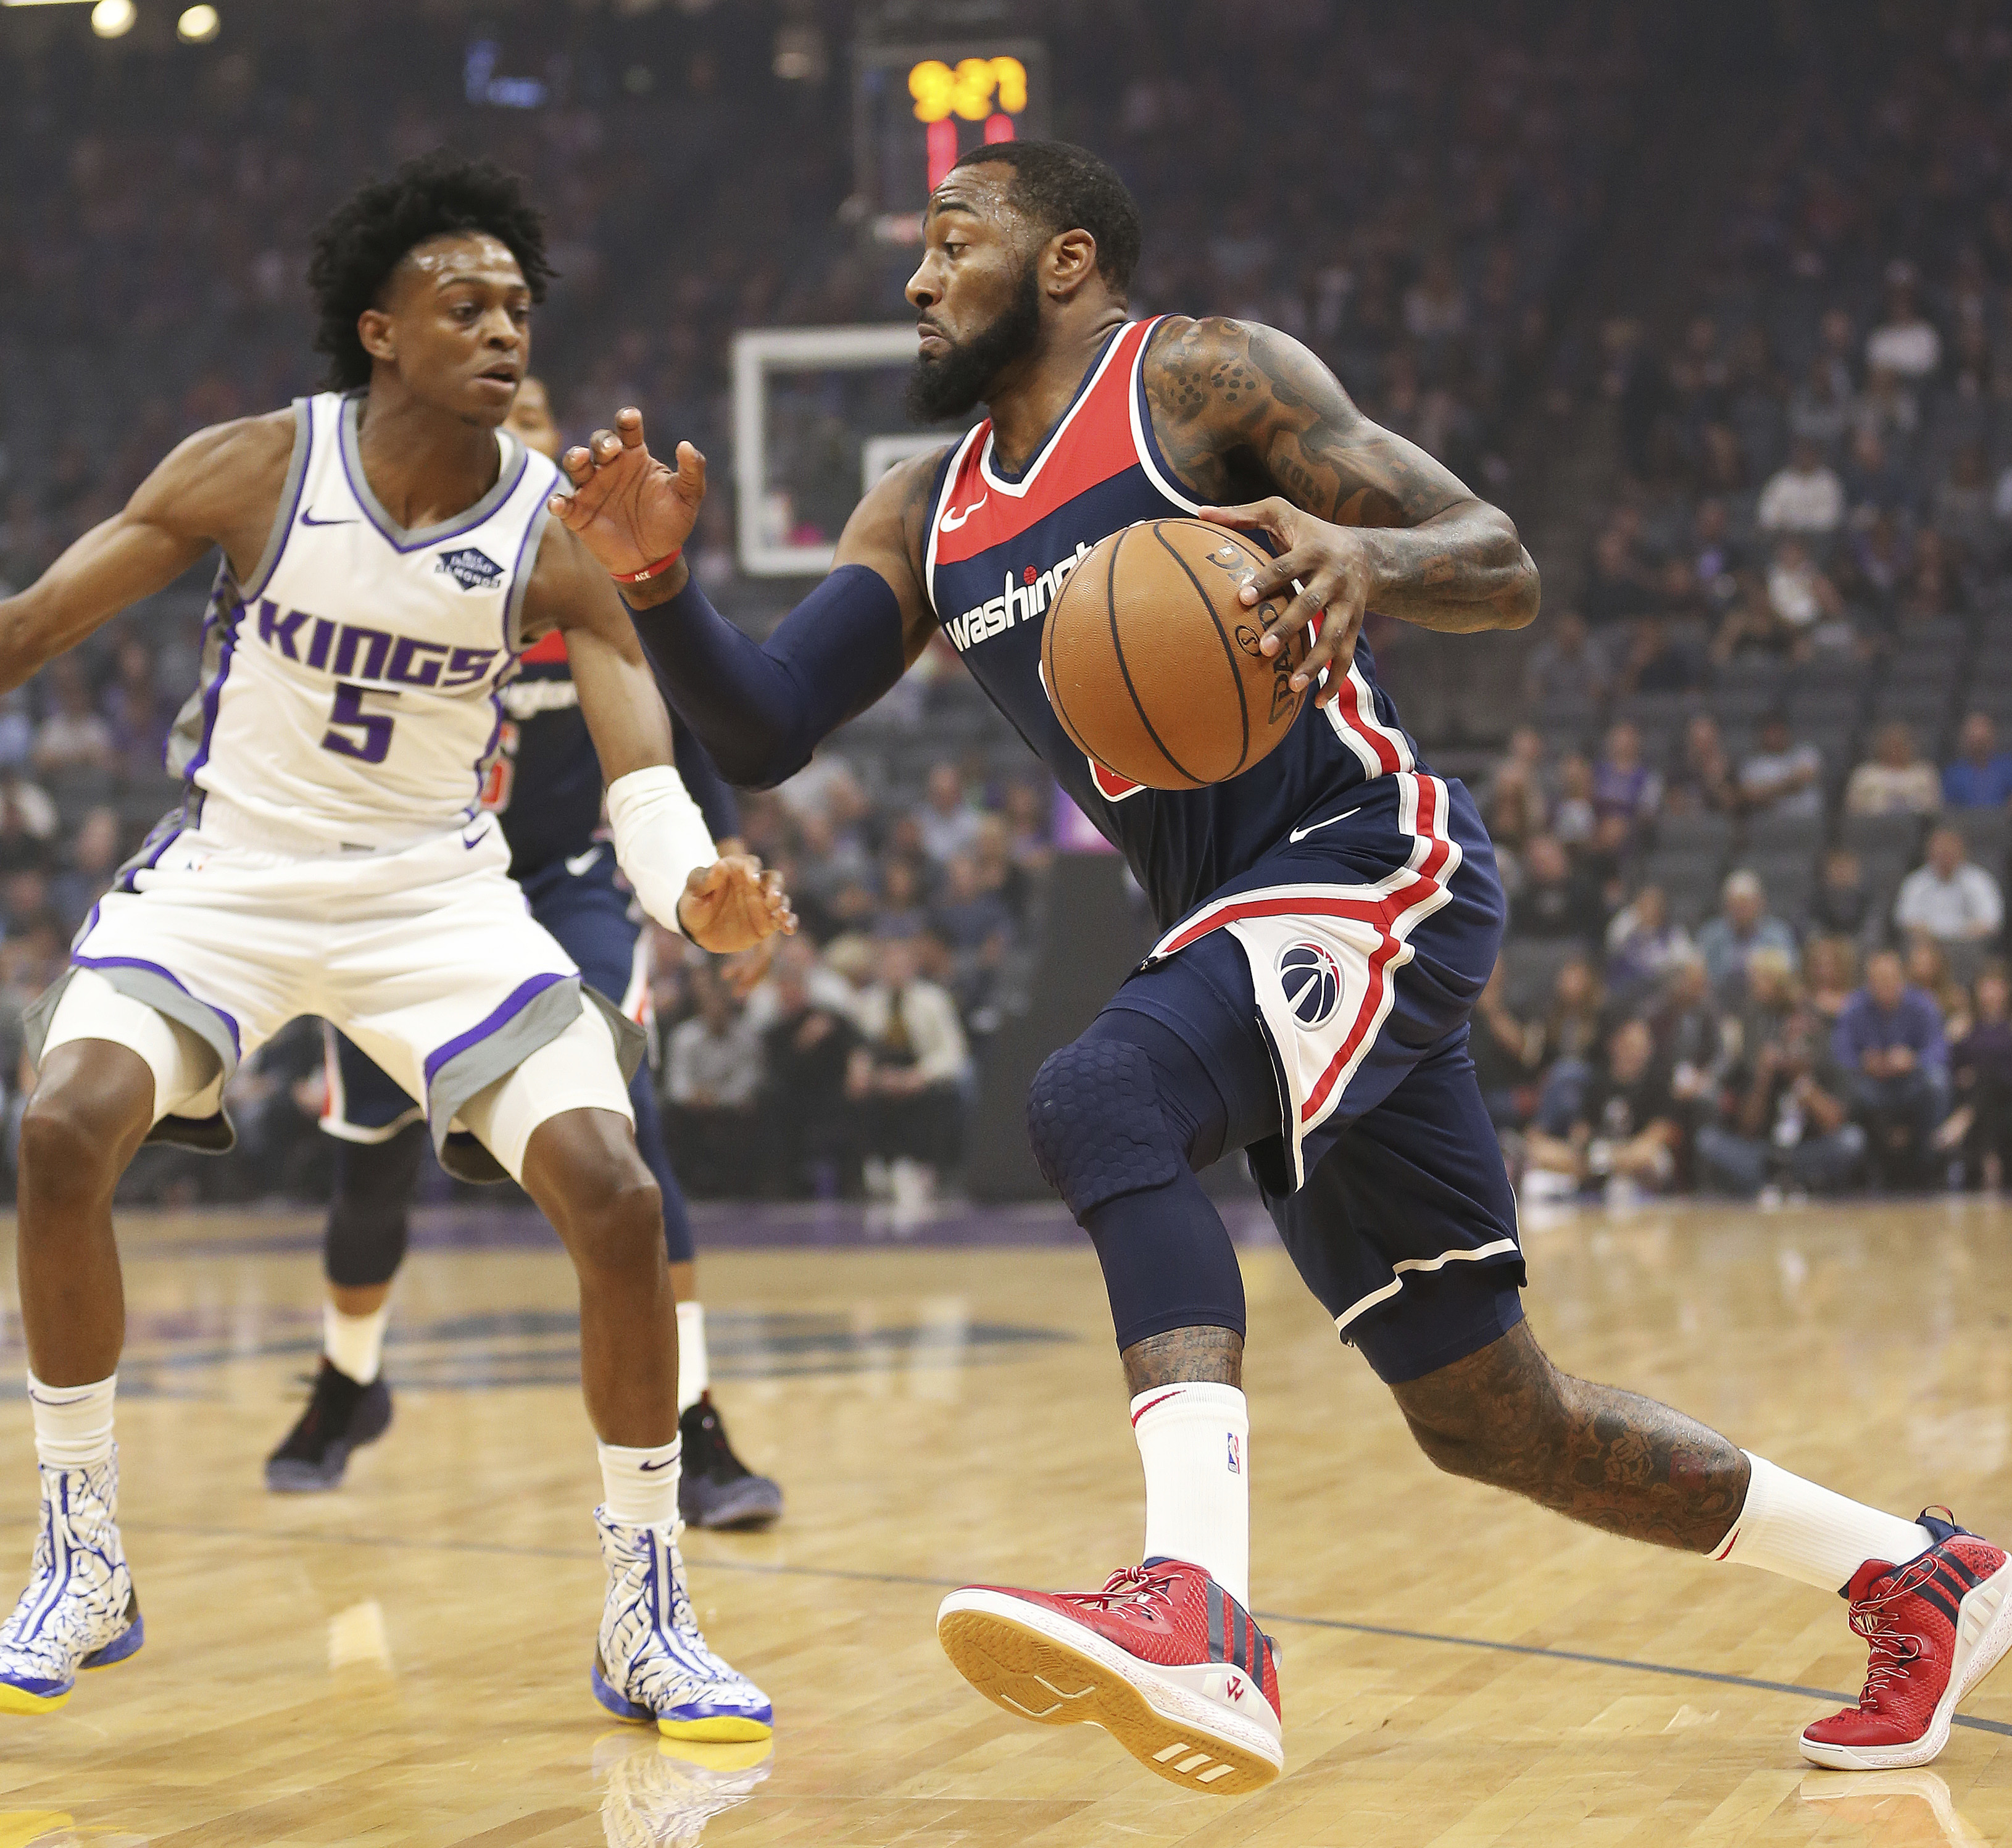 Kings take control in 4th, hold off Wizards 116-112